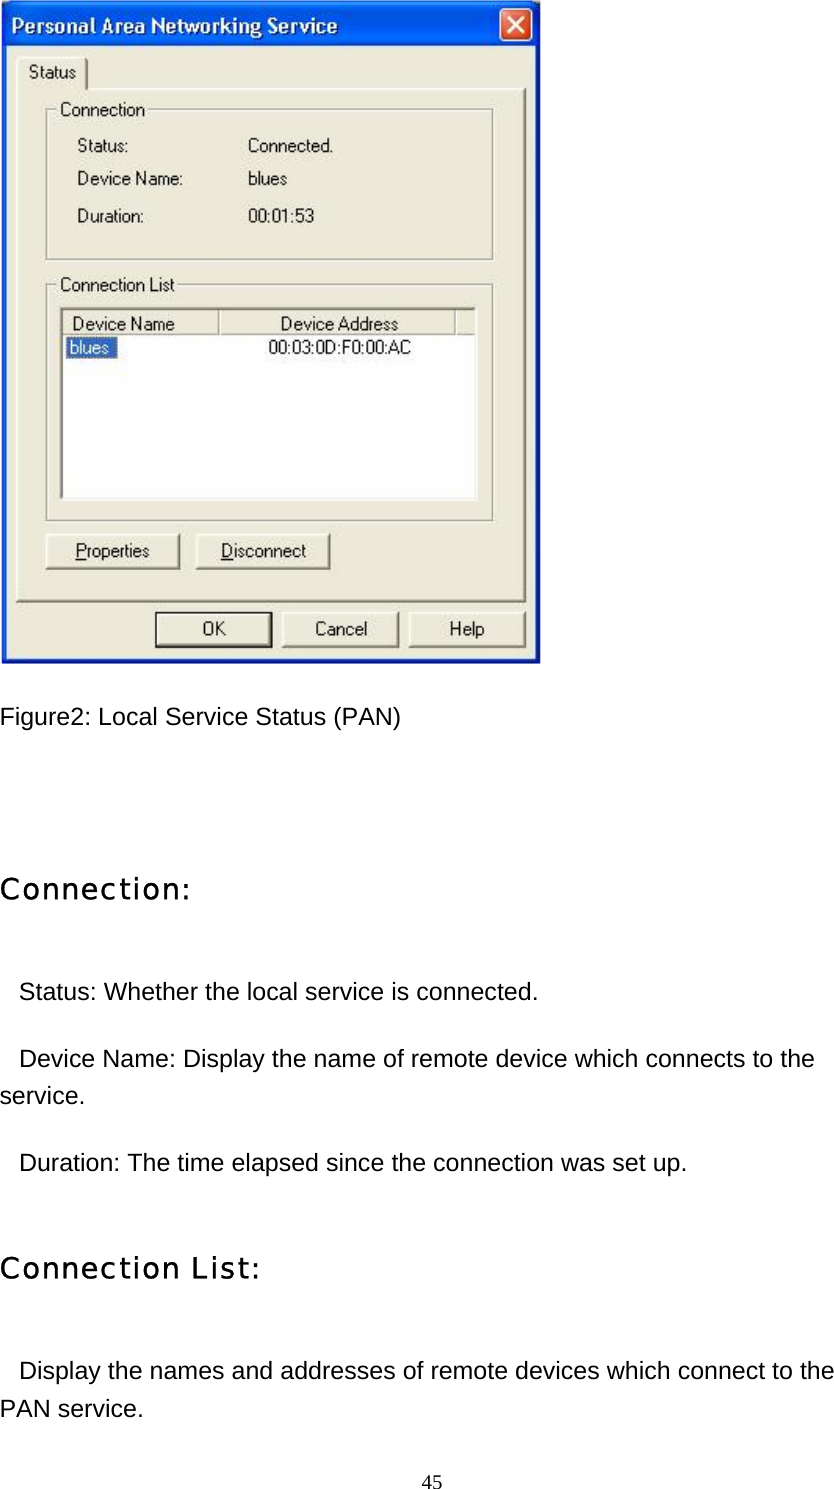   45 Figure2: Local Service Status (PAN)   Connection:    Status: Whether the local service is connected.    Device Name: Display the name of remote device which connects to the service.    Duration: The time elapsed since the connection was set up. Connection List:    Display the names and addresses of remote devices which connect to the PAN service. 